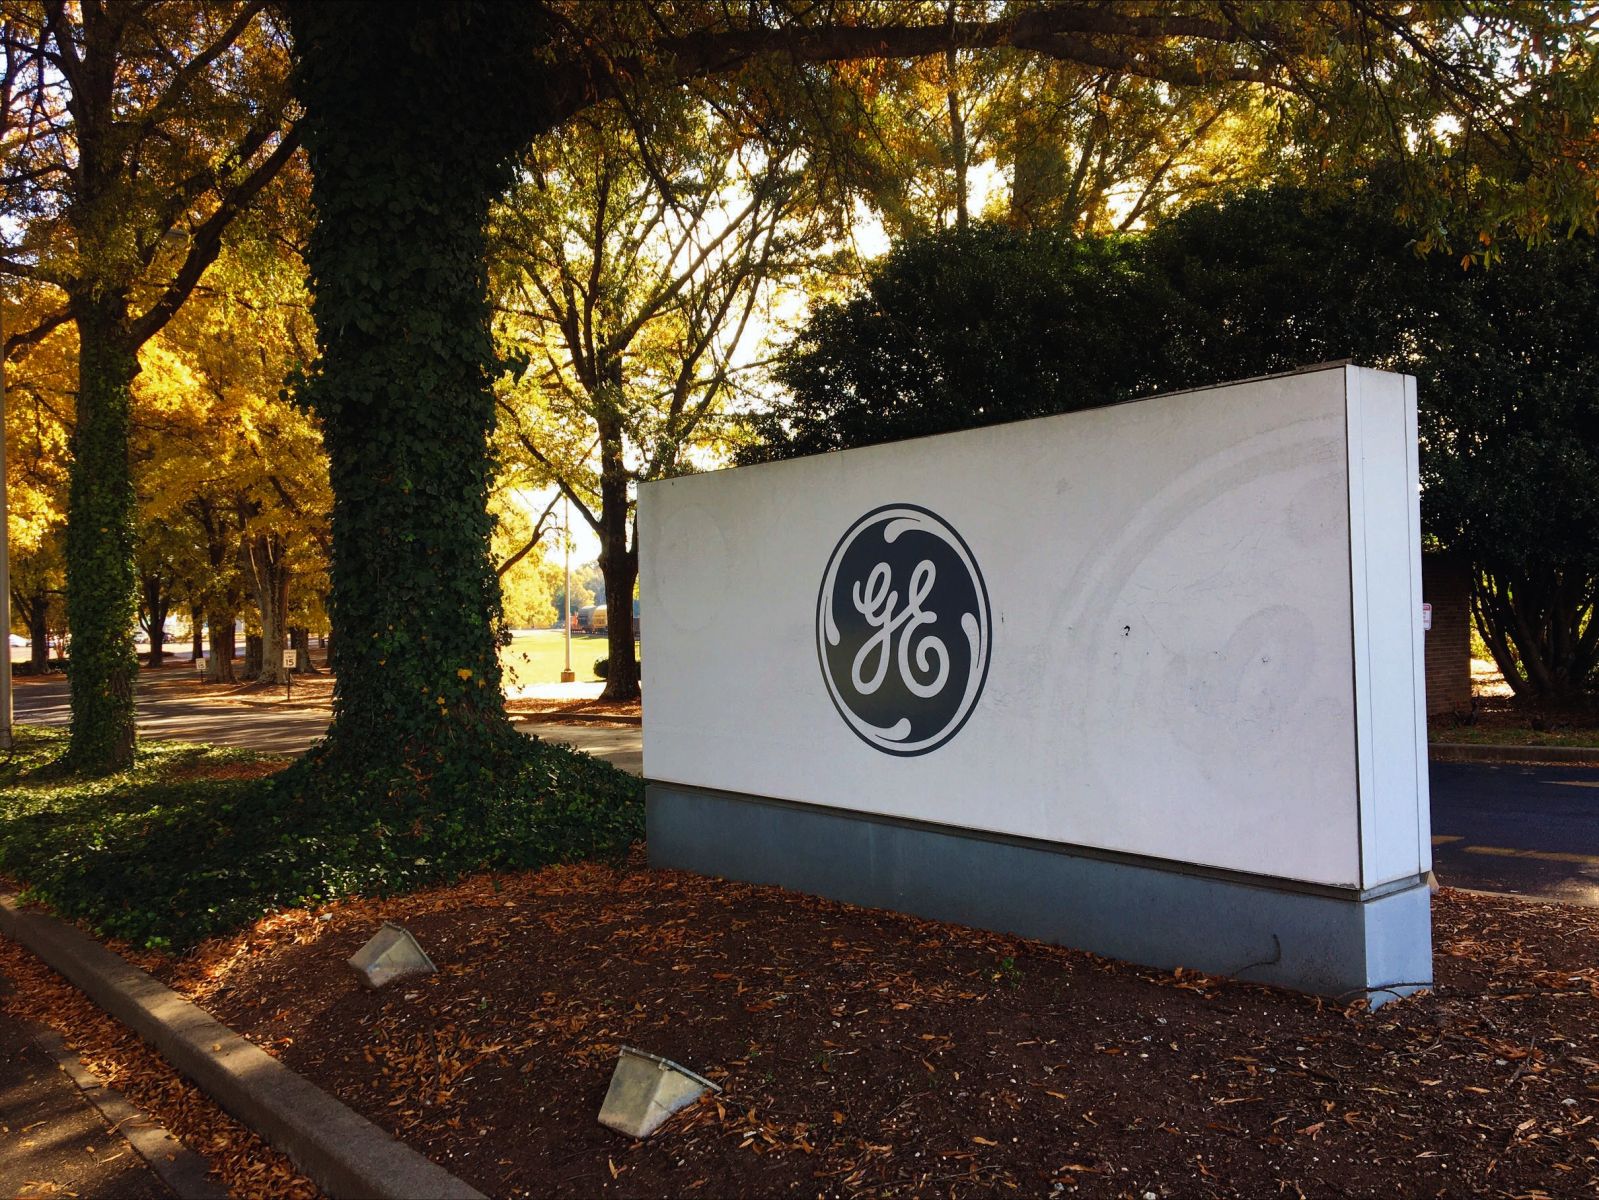 Dozens of protestors reportedly clocked out of work at Greenville's GE plant to participate in a protest against the federal vaccine mandate but they did not resign beforehand, according to a GE spokesperson. (Photo/Molly Hulsey)